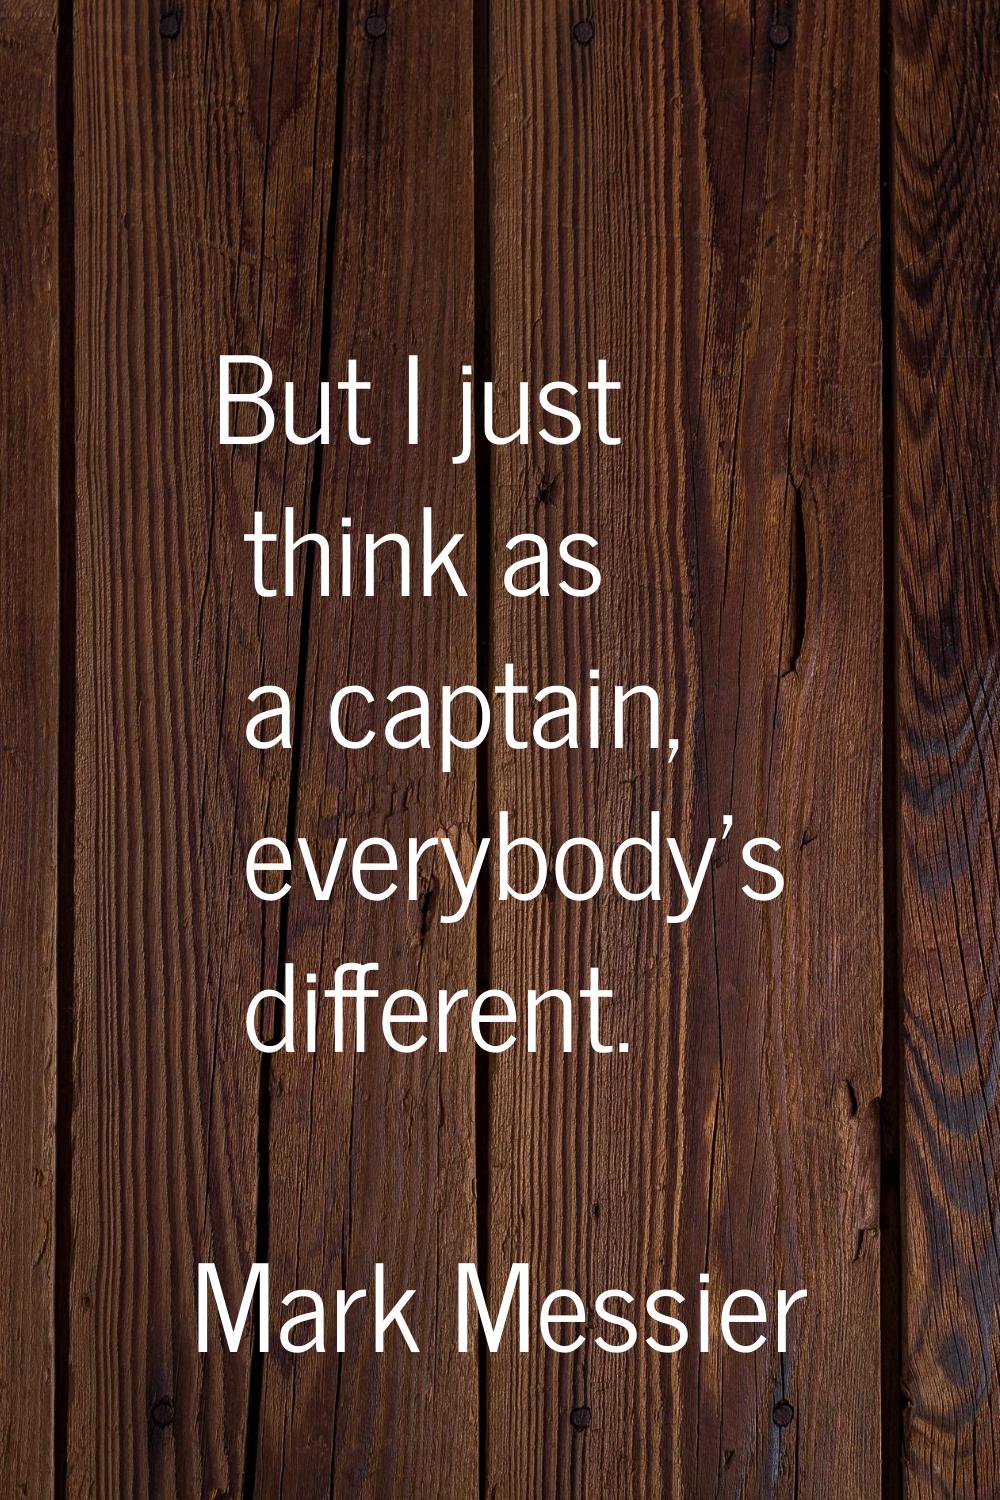 But I just think as a captain, everybody's different.